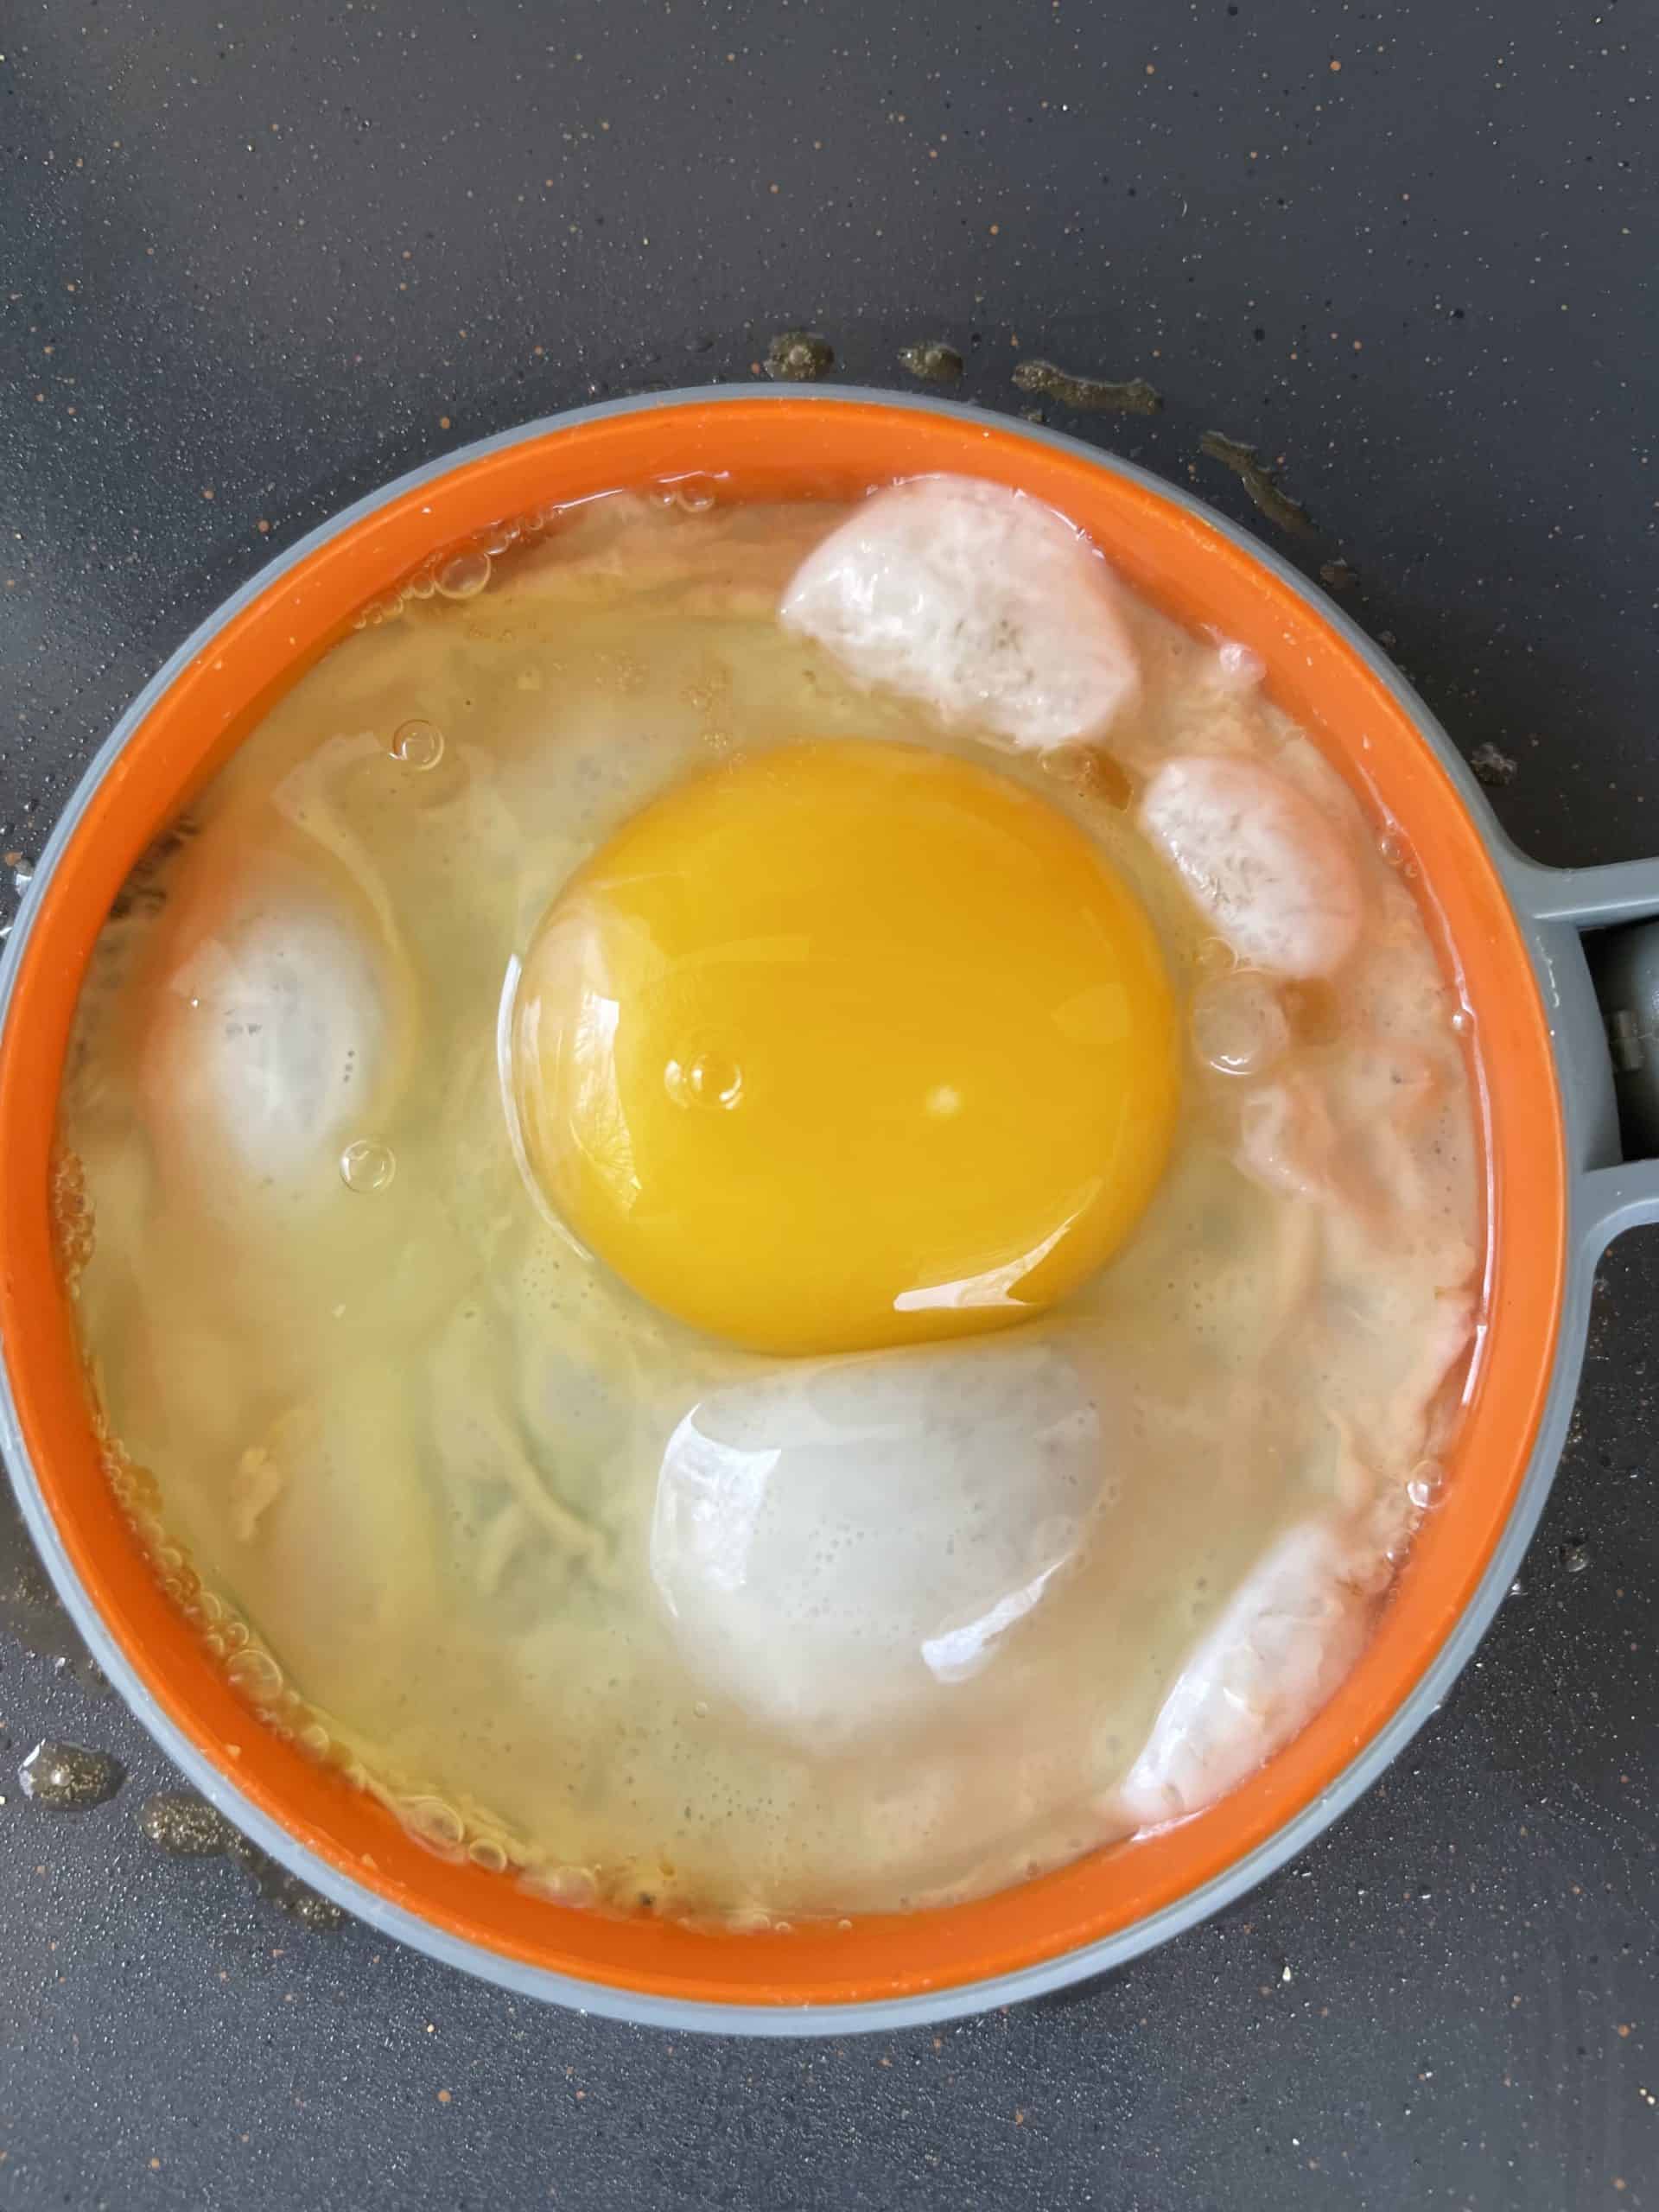 Crack a whole egg into the egg ring.